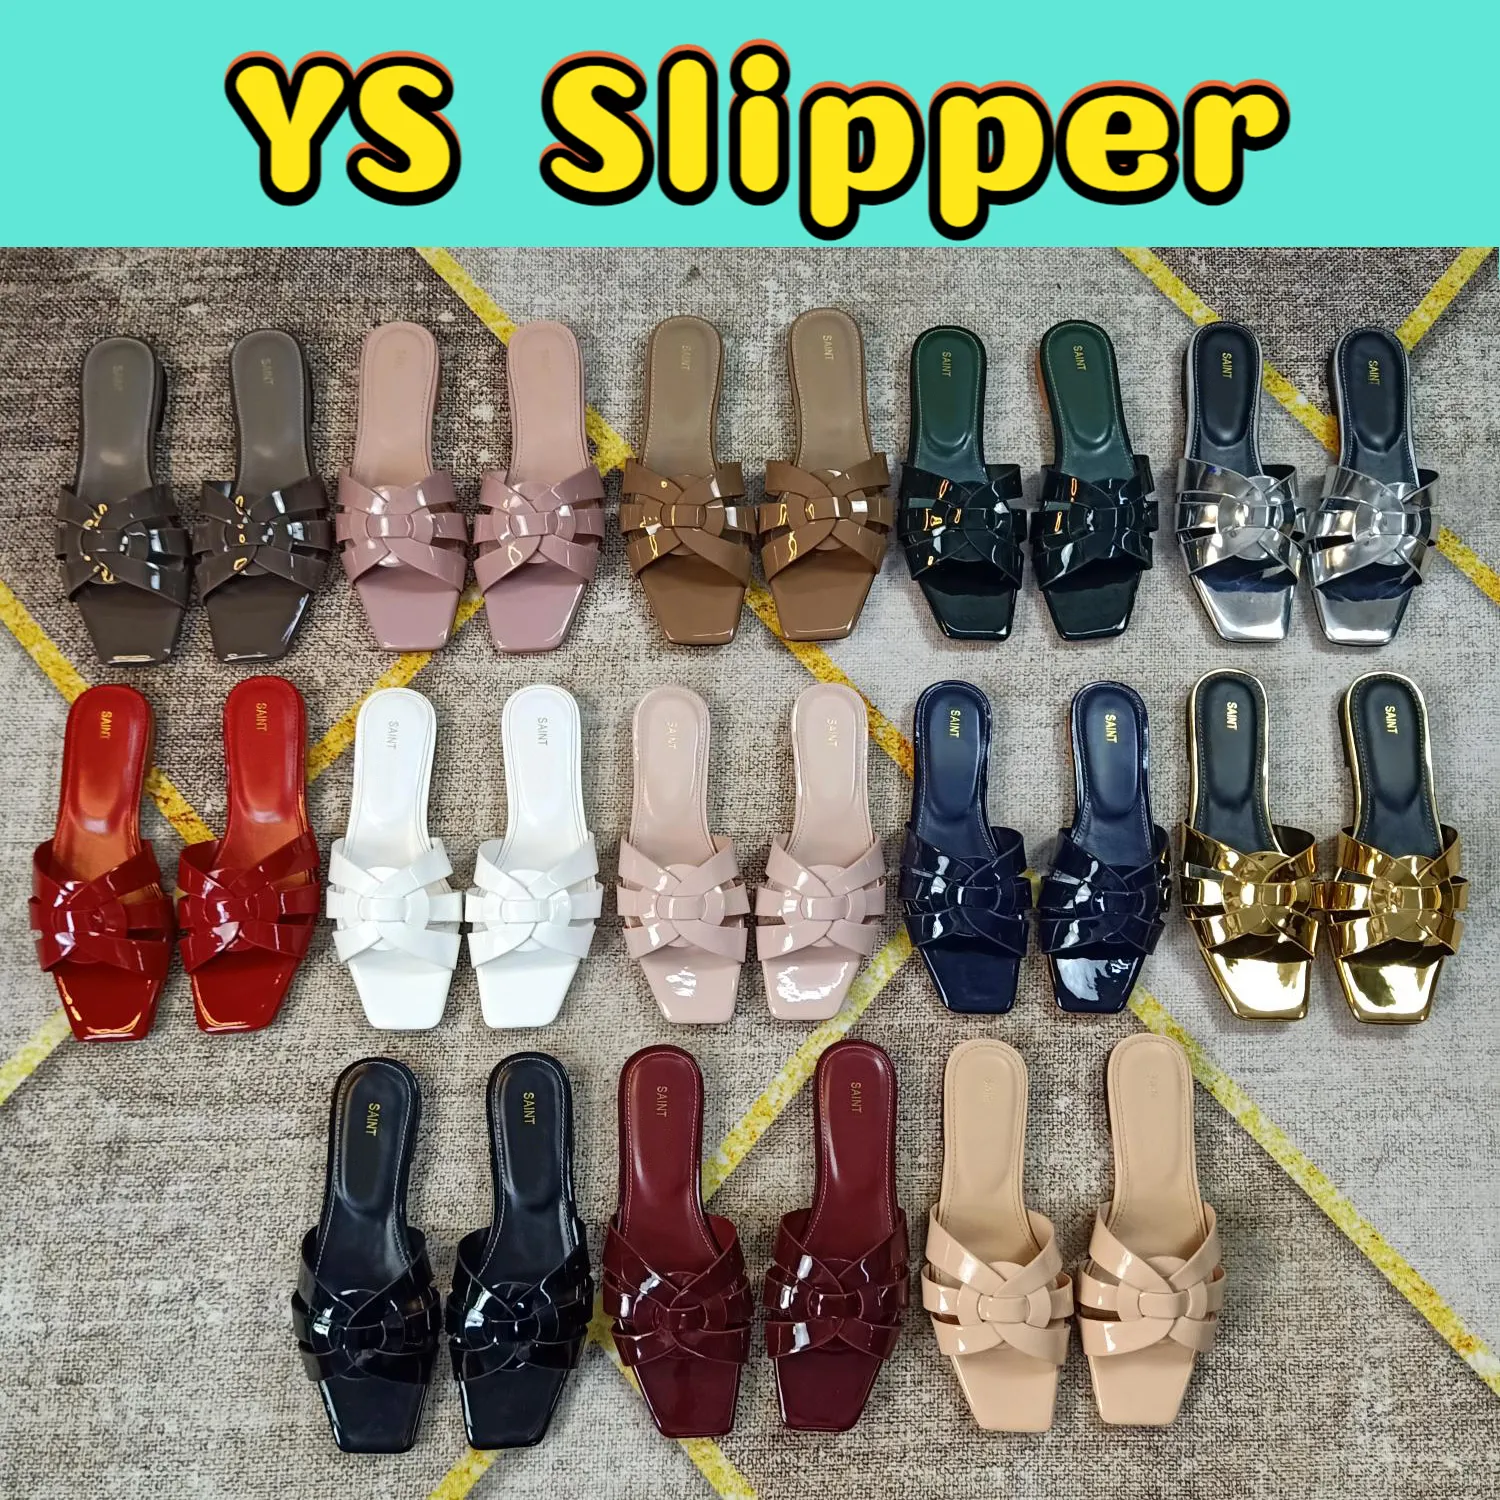 Designer slipper Tribute Flat Leather interwining straps YS Slide Sandals beach women shoes Amber black Nappa Amber grey Croc Embossed red Silver Patent slippers